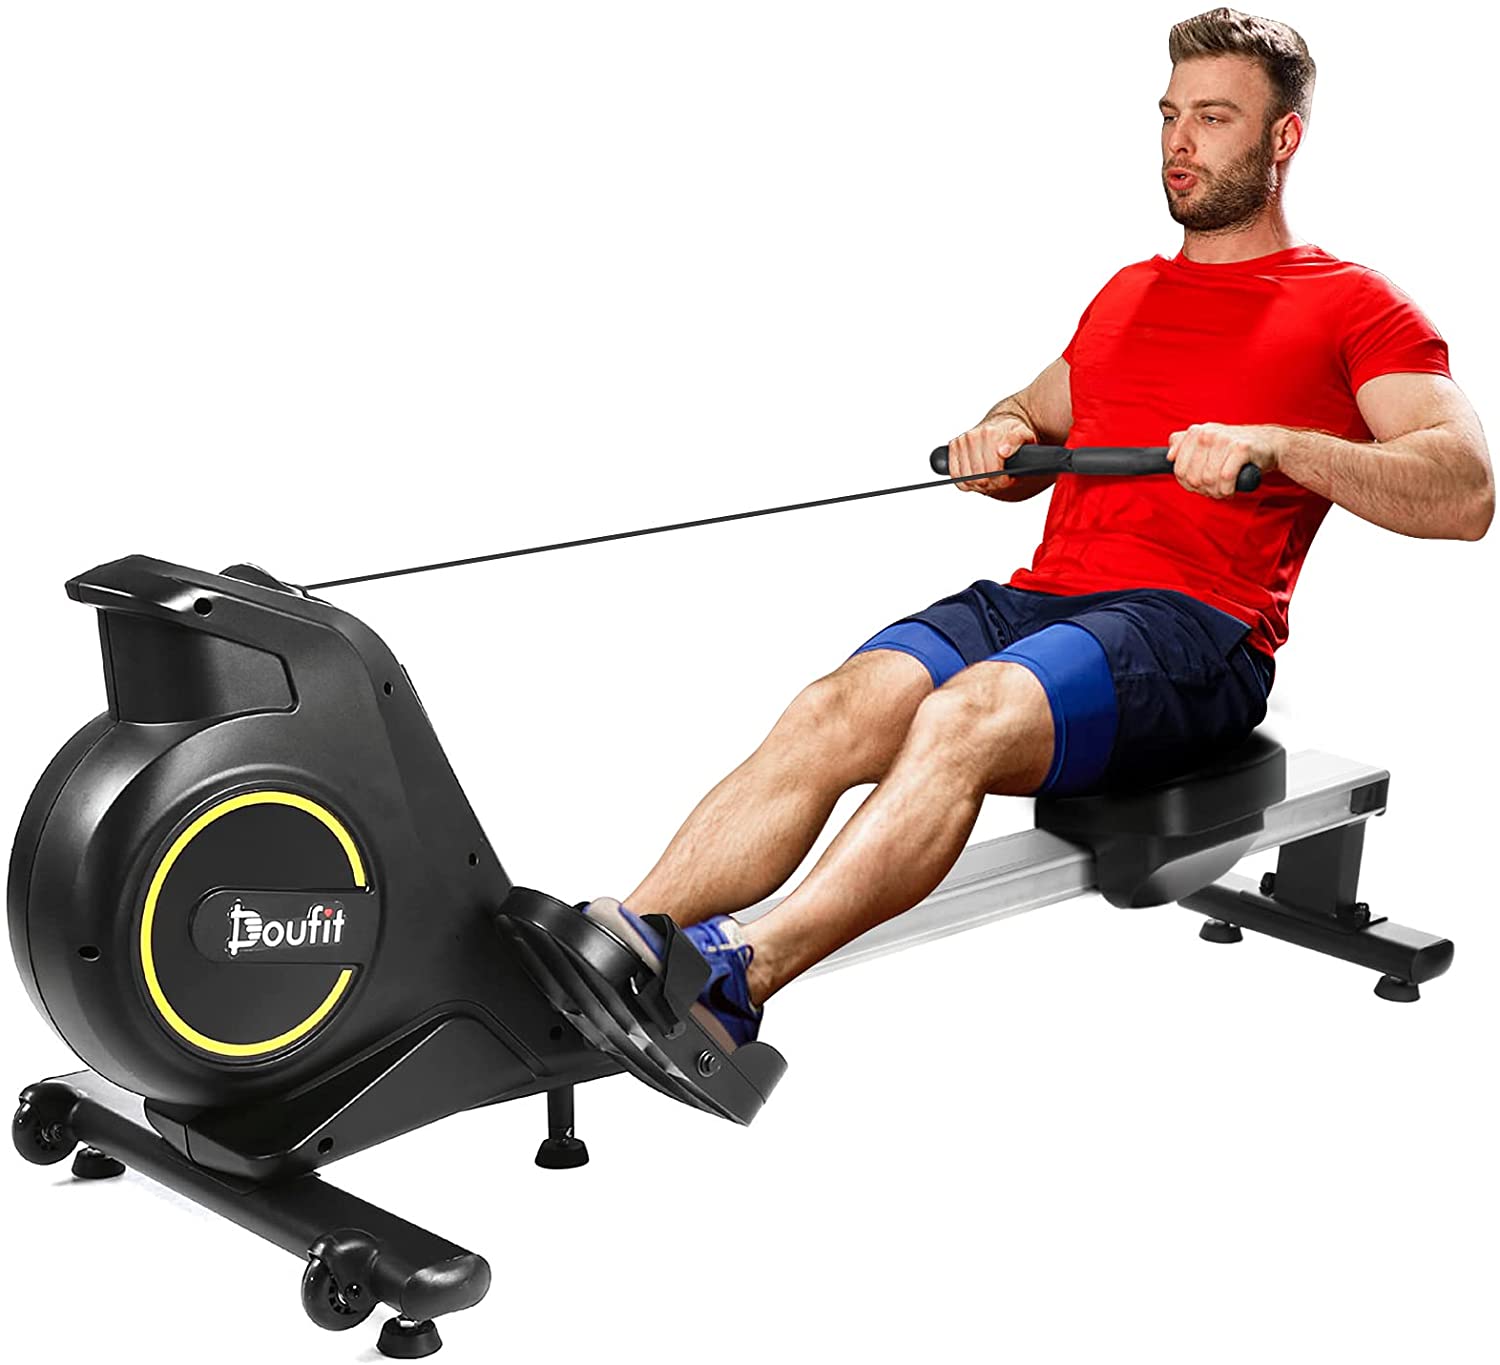 Best portable Rowing Machines